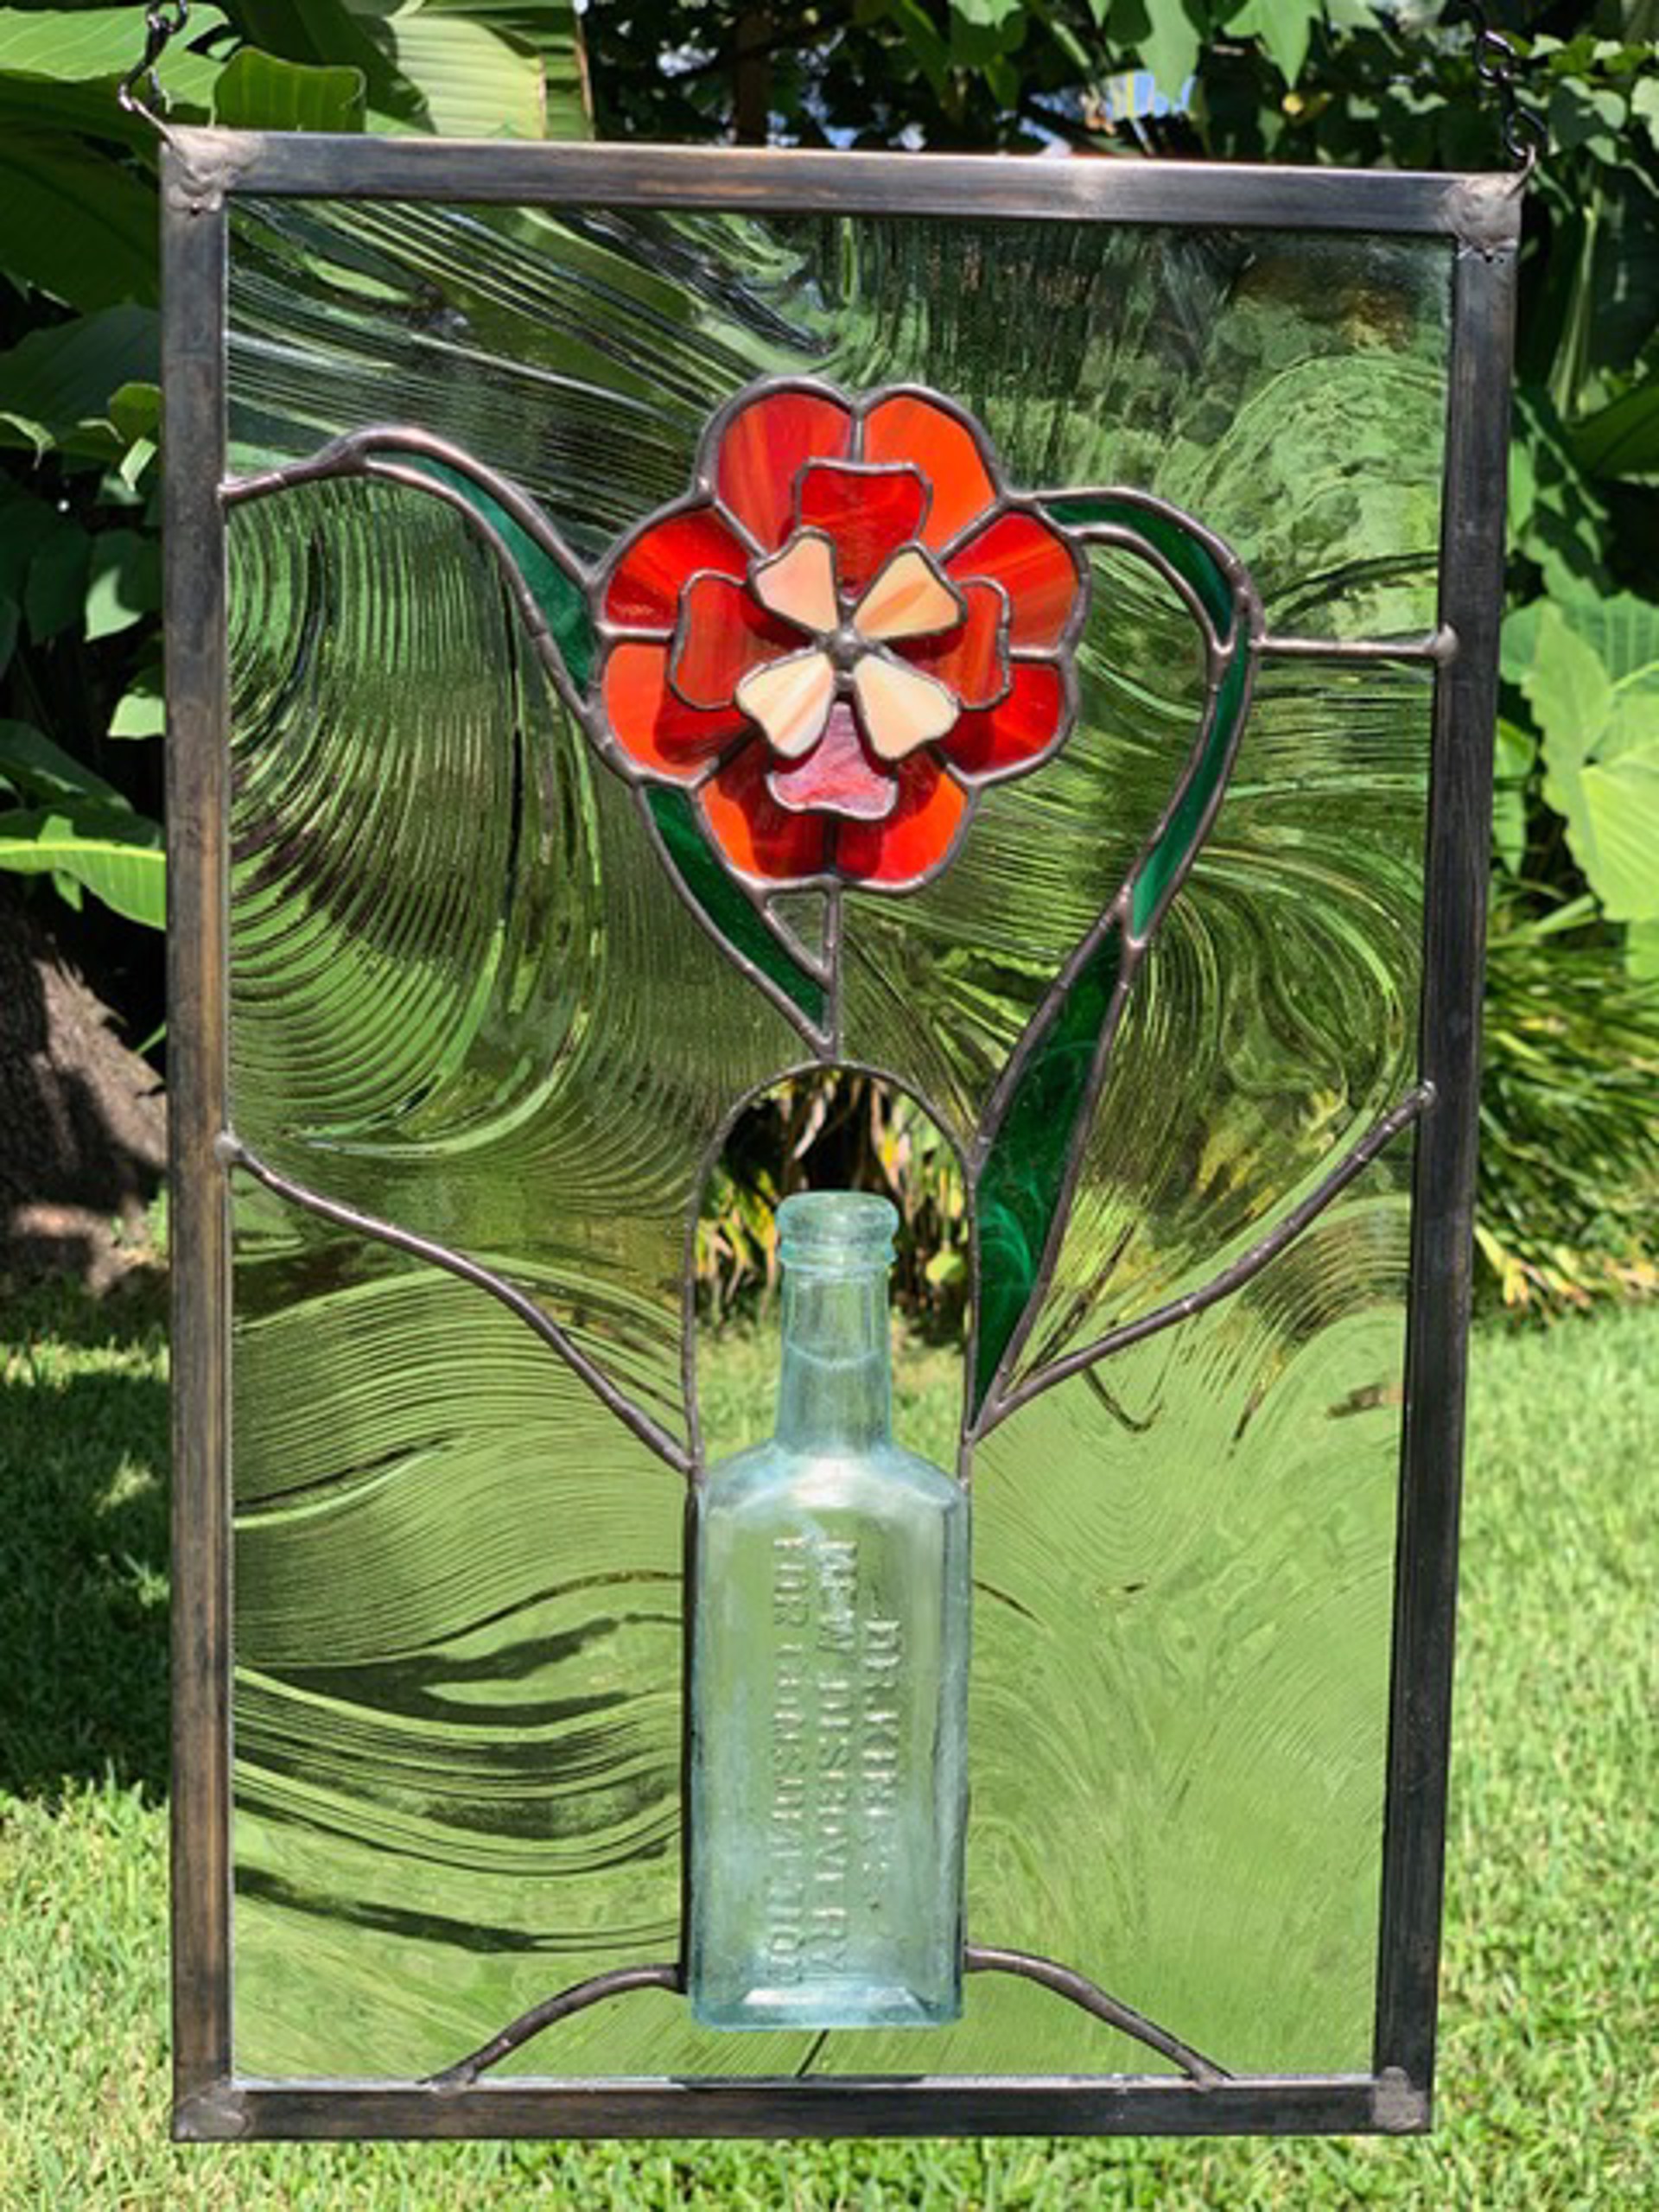 Rescued River Bottles, 3-D Flower in Red by Shelly Vokes